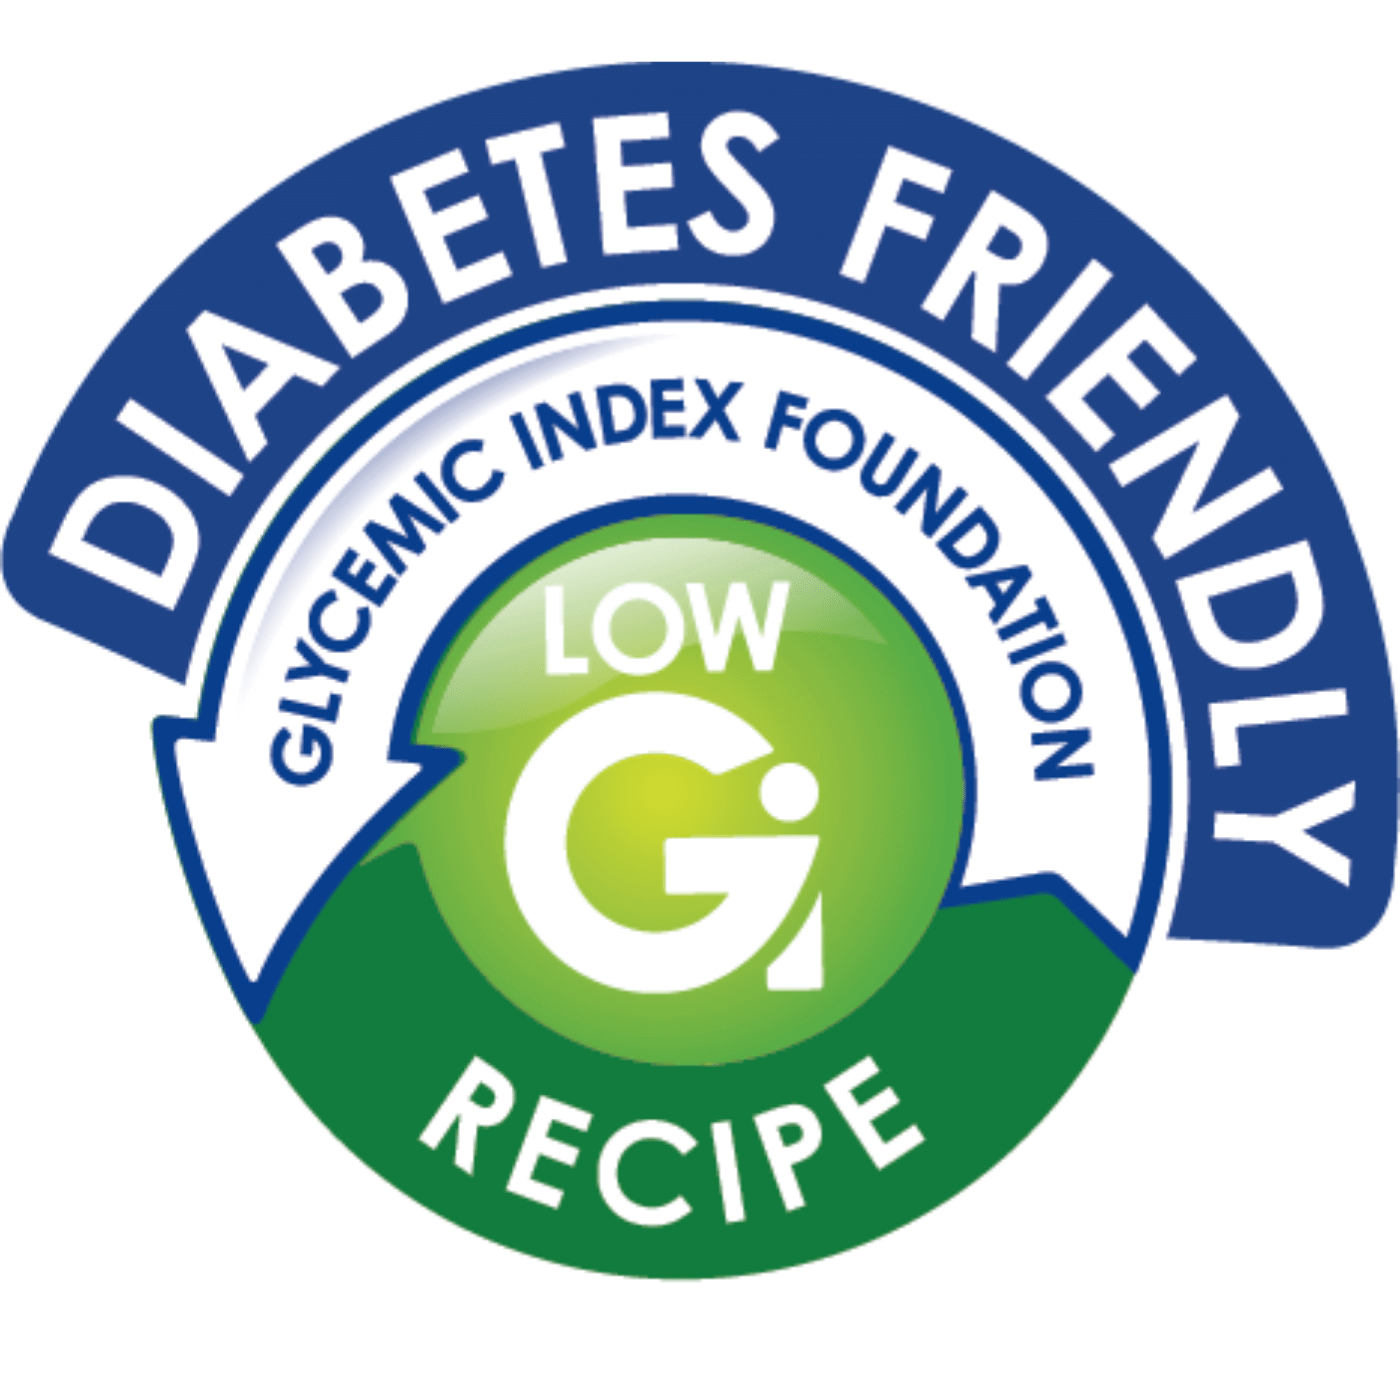 Diabetes Friendly badge. Awarded by Glycemic Index Foundation and certifying the recipes in the 'Low GI Diet Shoppers Guide' are low GI.